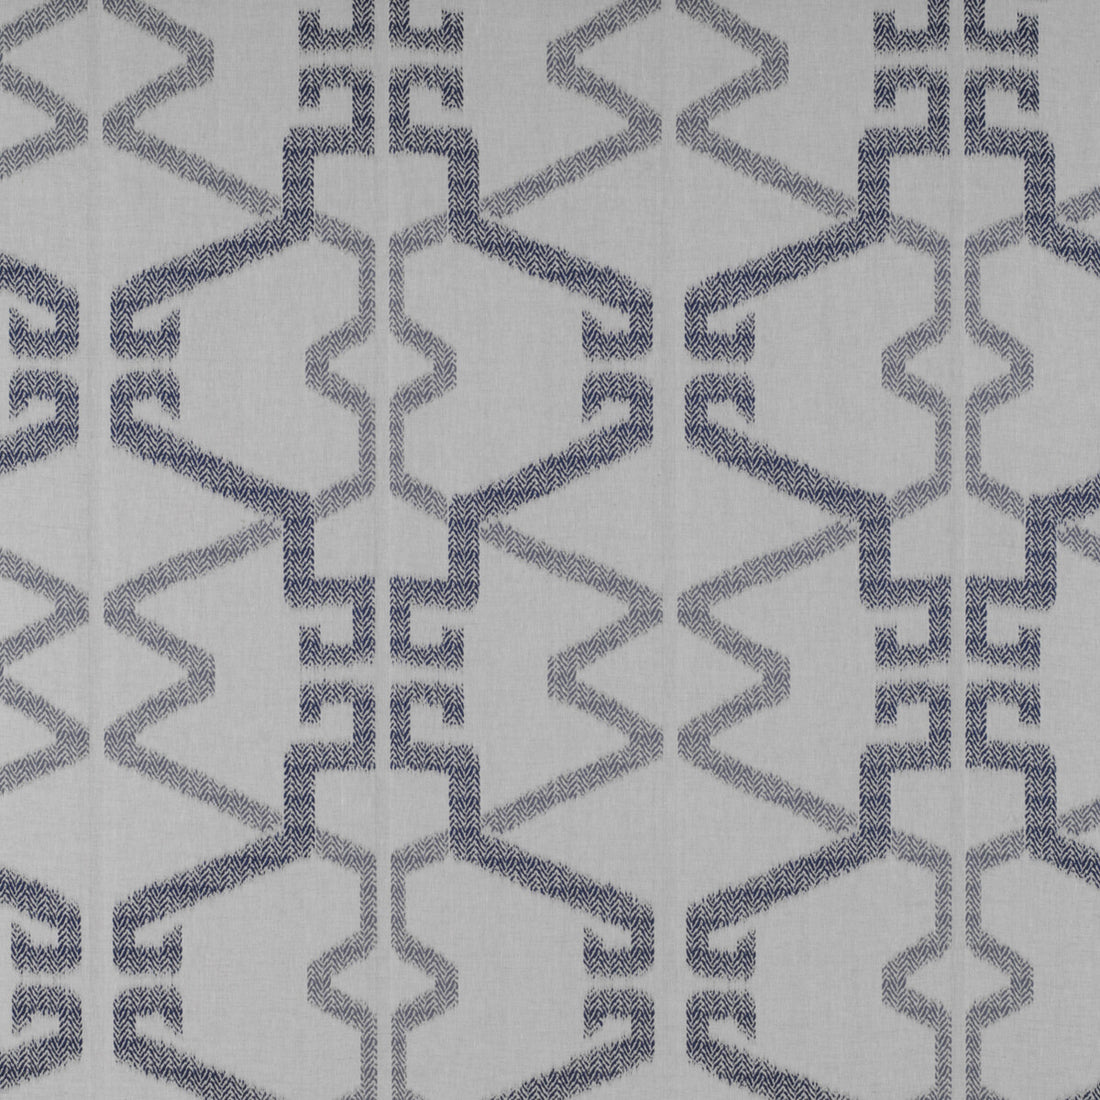 Caprera fabric in azul/gris color - pattern GDT5314.004.0 - by Gaston y Daniela in the Tierras collection